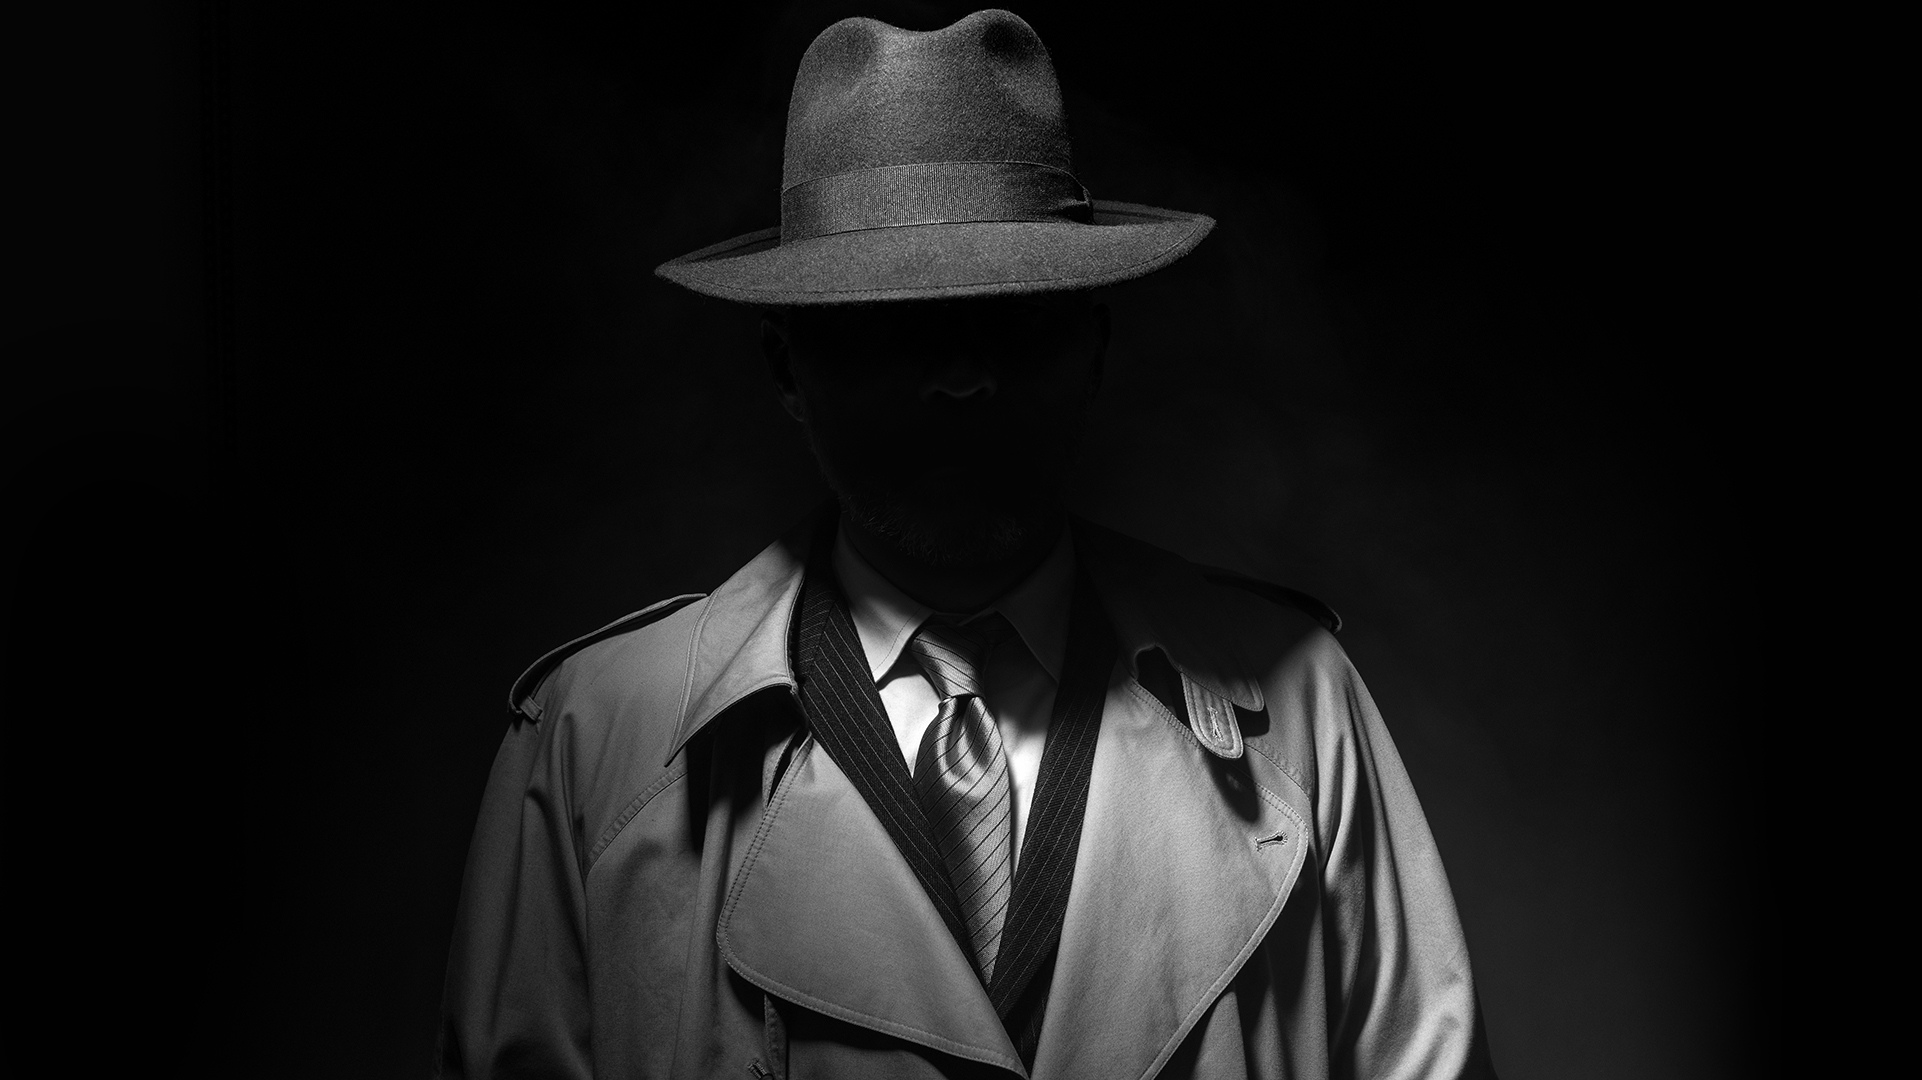 Man posing in the dark with a fedora hat and a trench coat, 1950s noir film style character